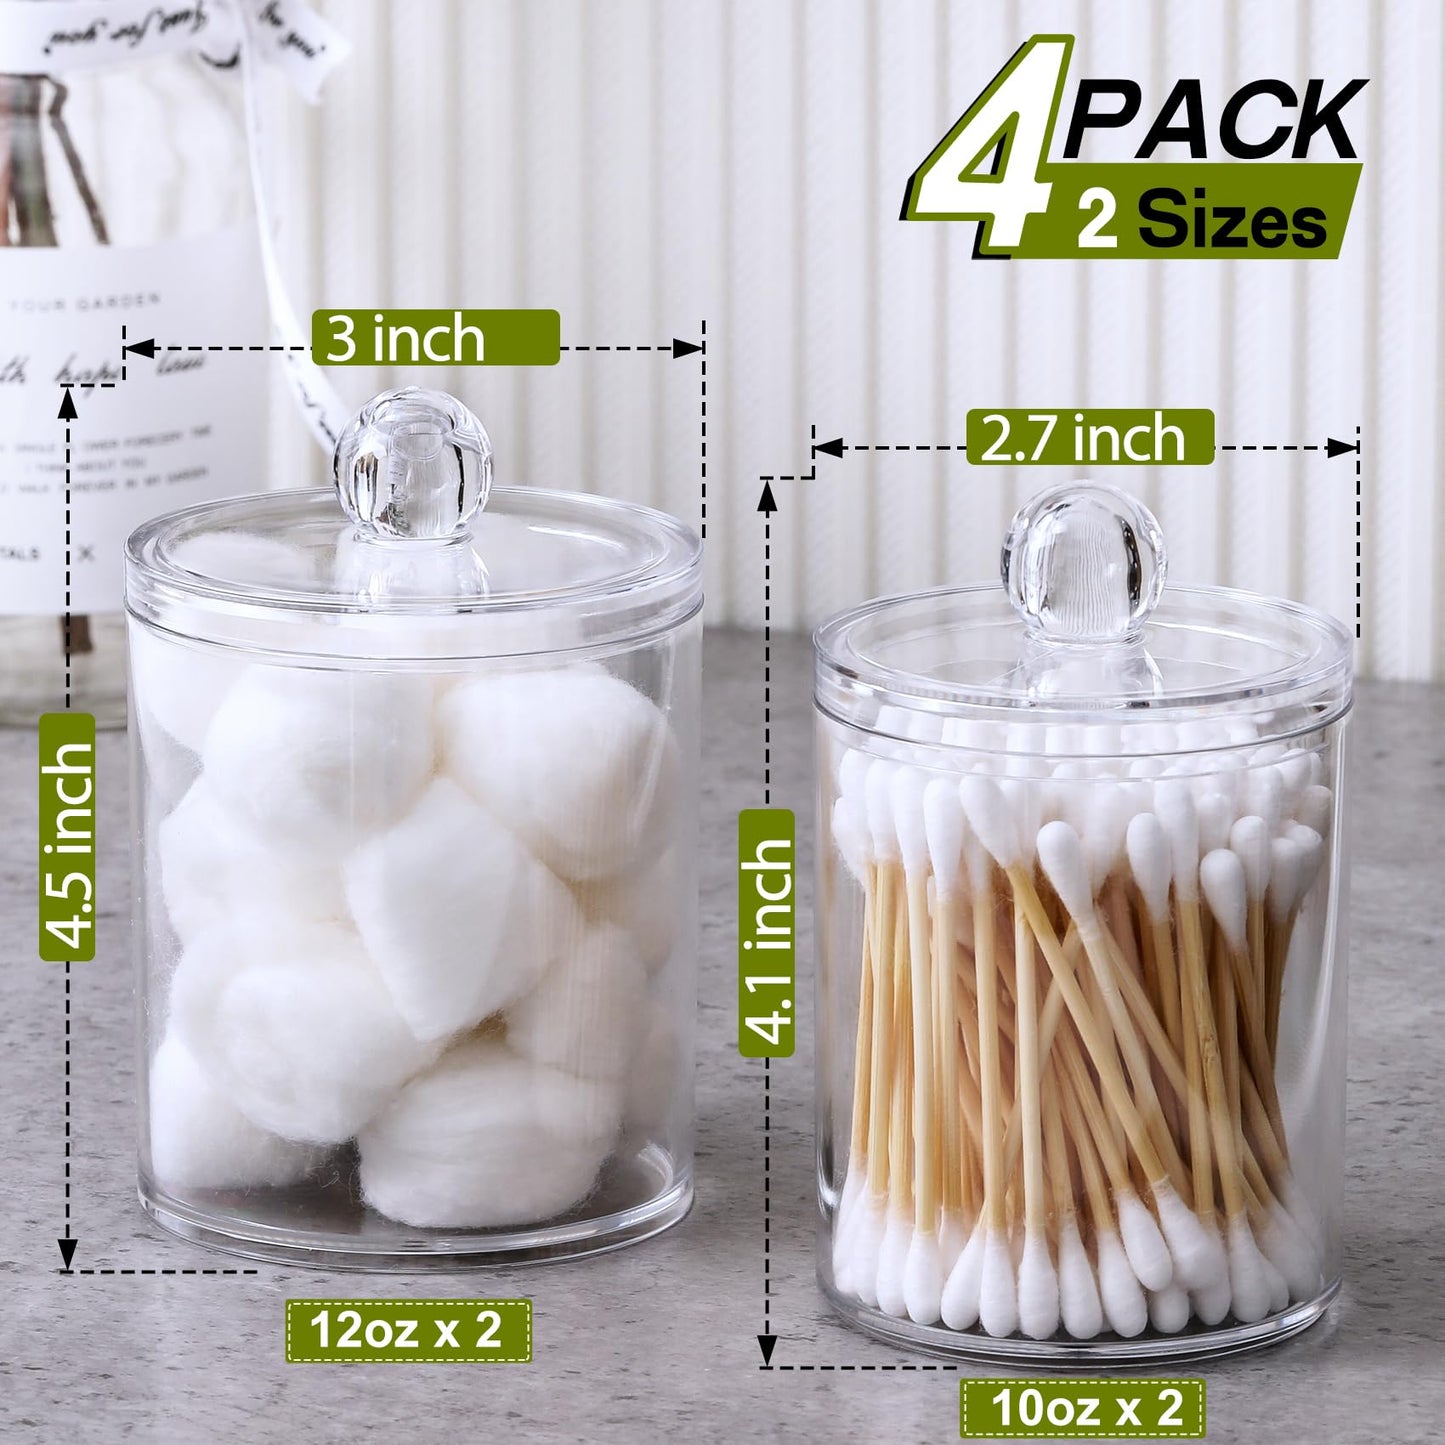 4 PACK Qtip Holder Dispenser for Cotton Ball, Cotton Swab, Cotton Round Pads, Floss Picks - Small Clear Plastic Apothecary Jar Set for Bathroom Canister Storage Organization, Vanity Makeup Organizer